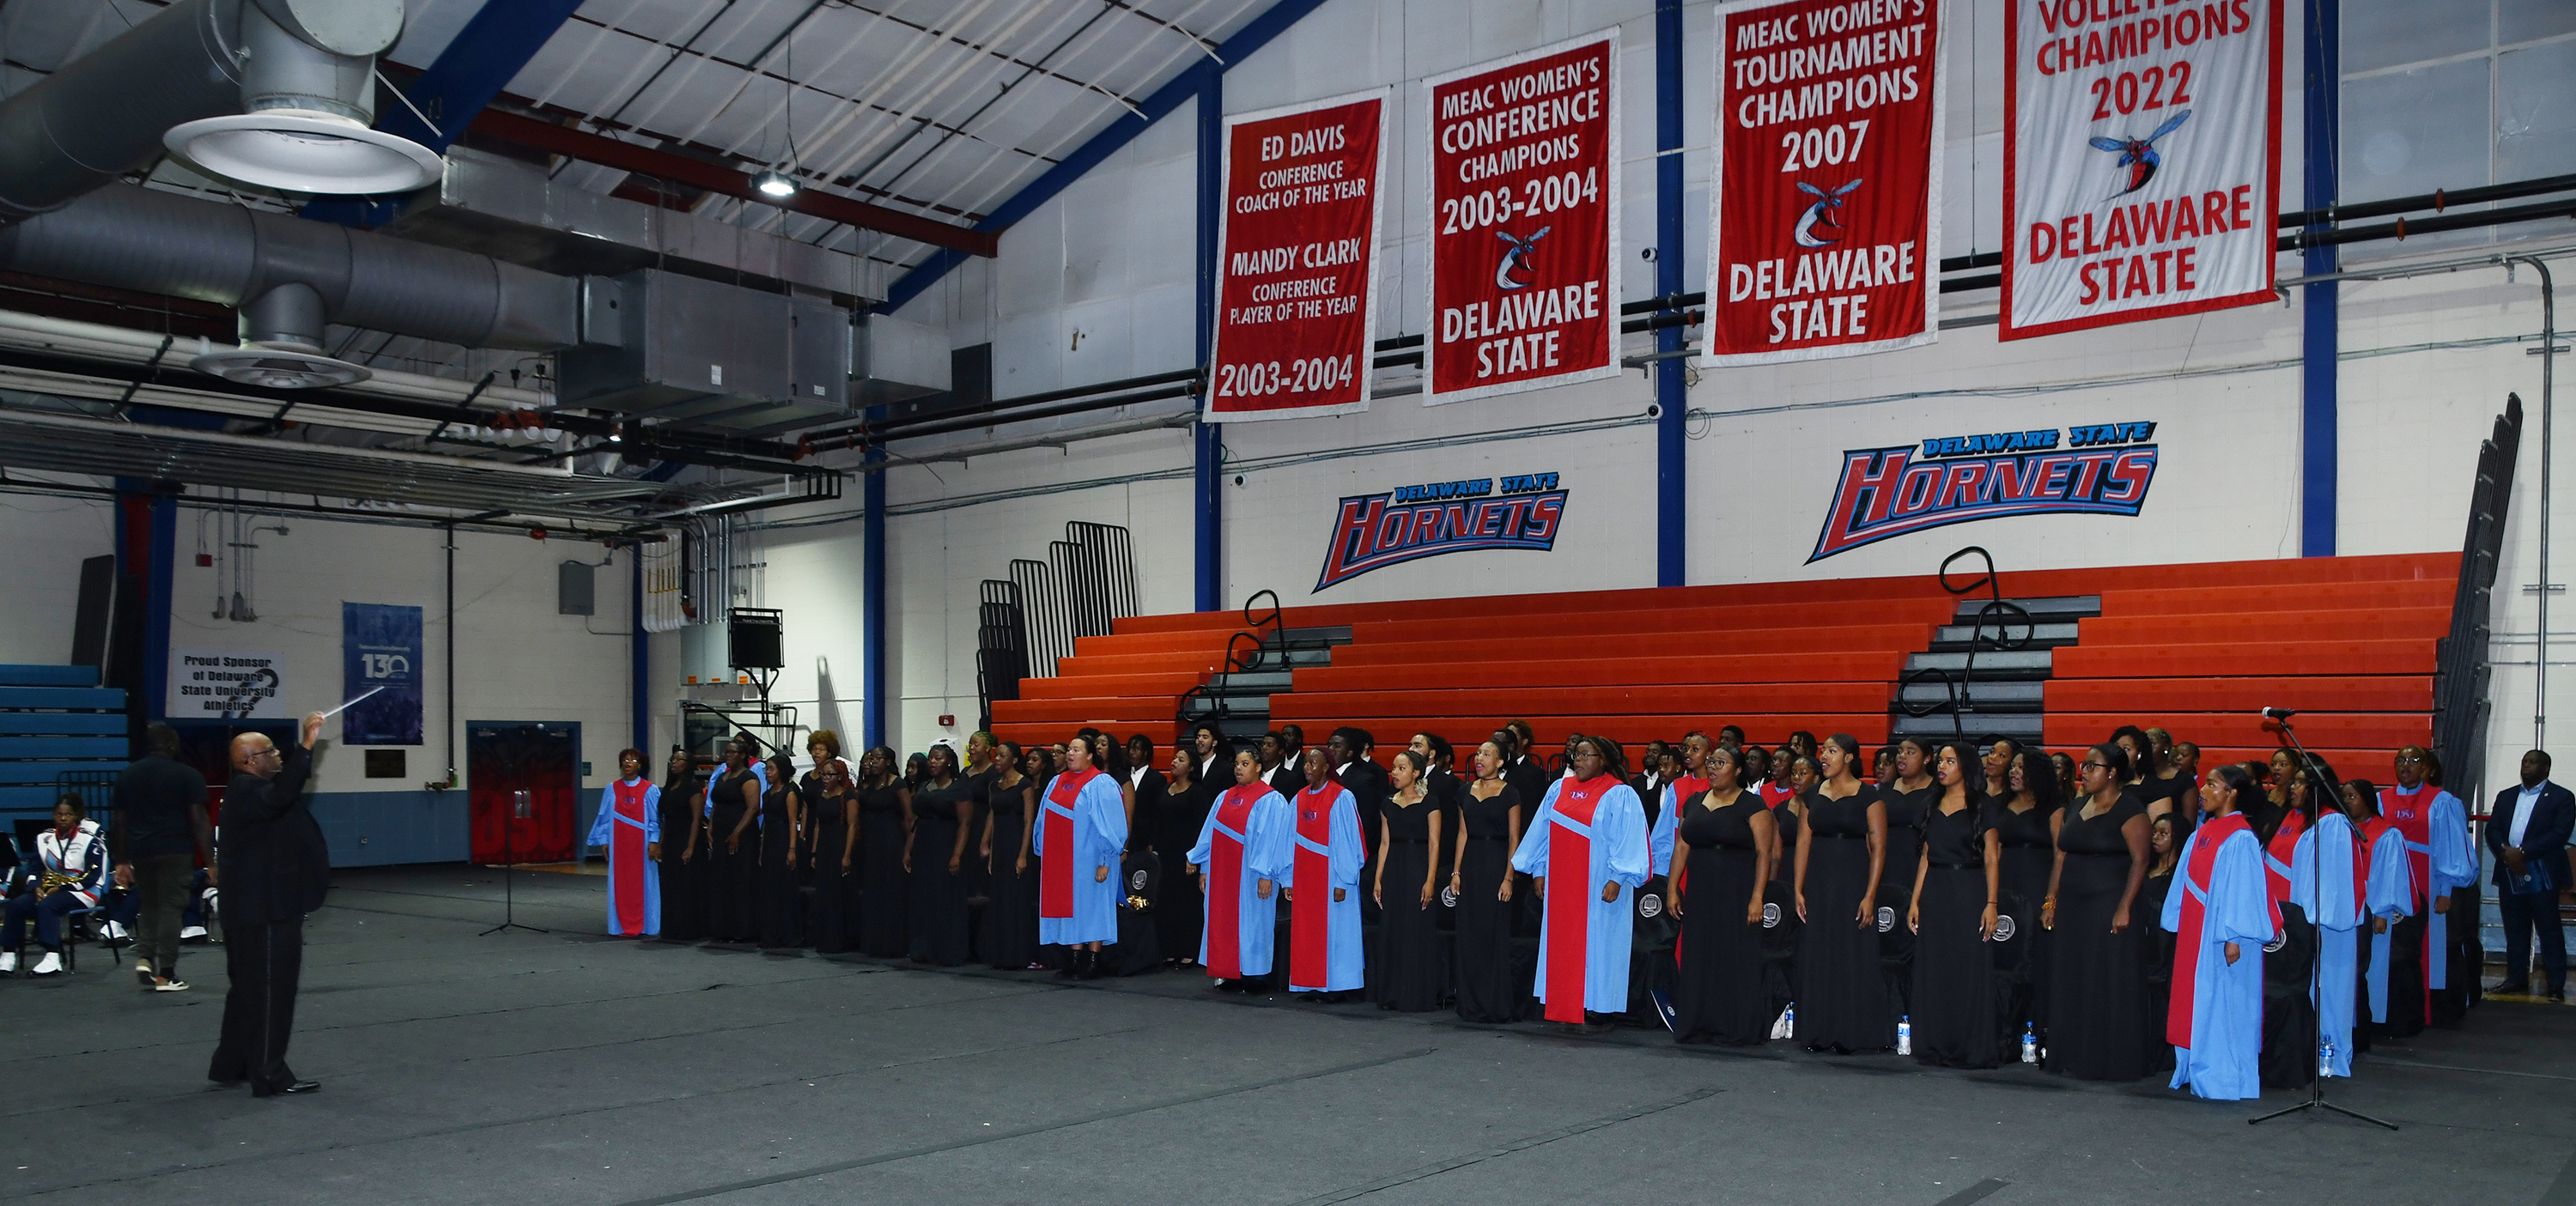 The 86-voice DSU Concert Choir that performed at the Convocation is the largest University singing group in anyone's memory.